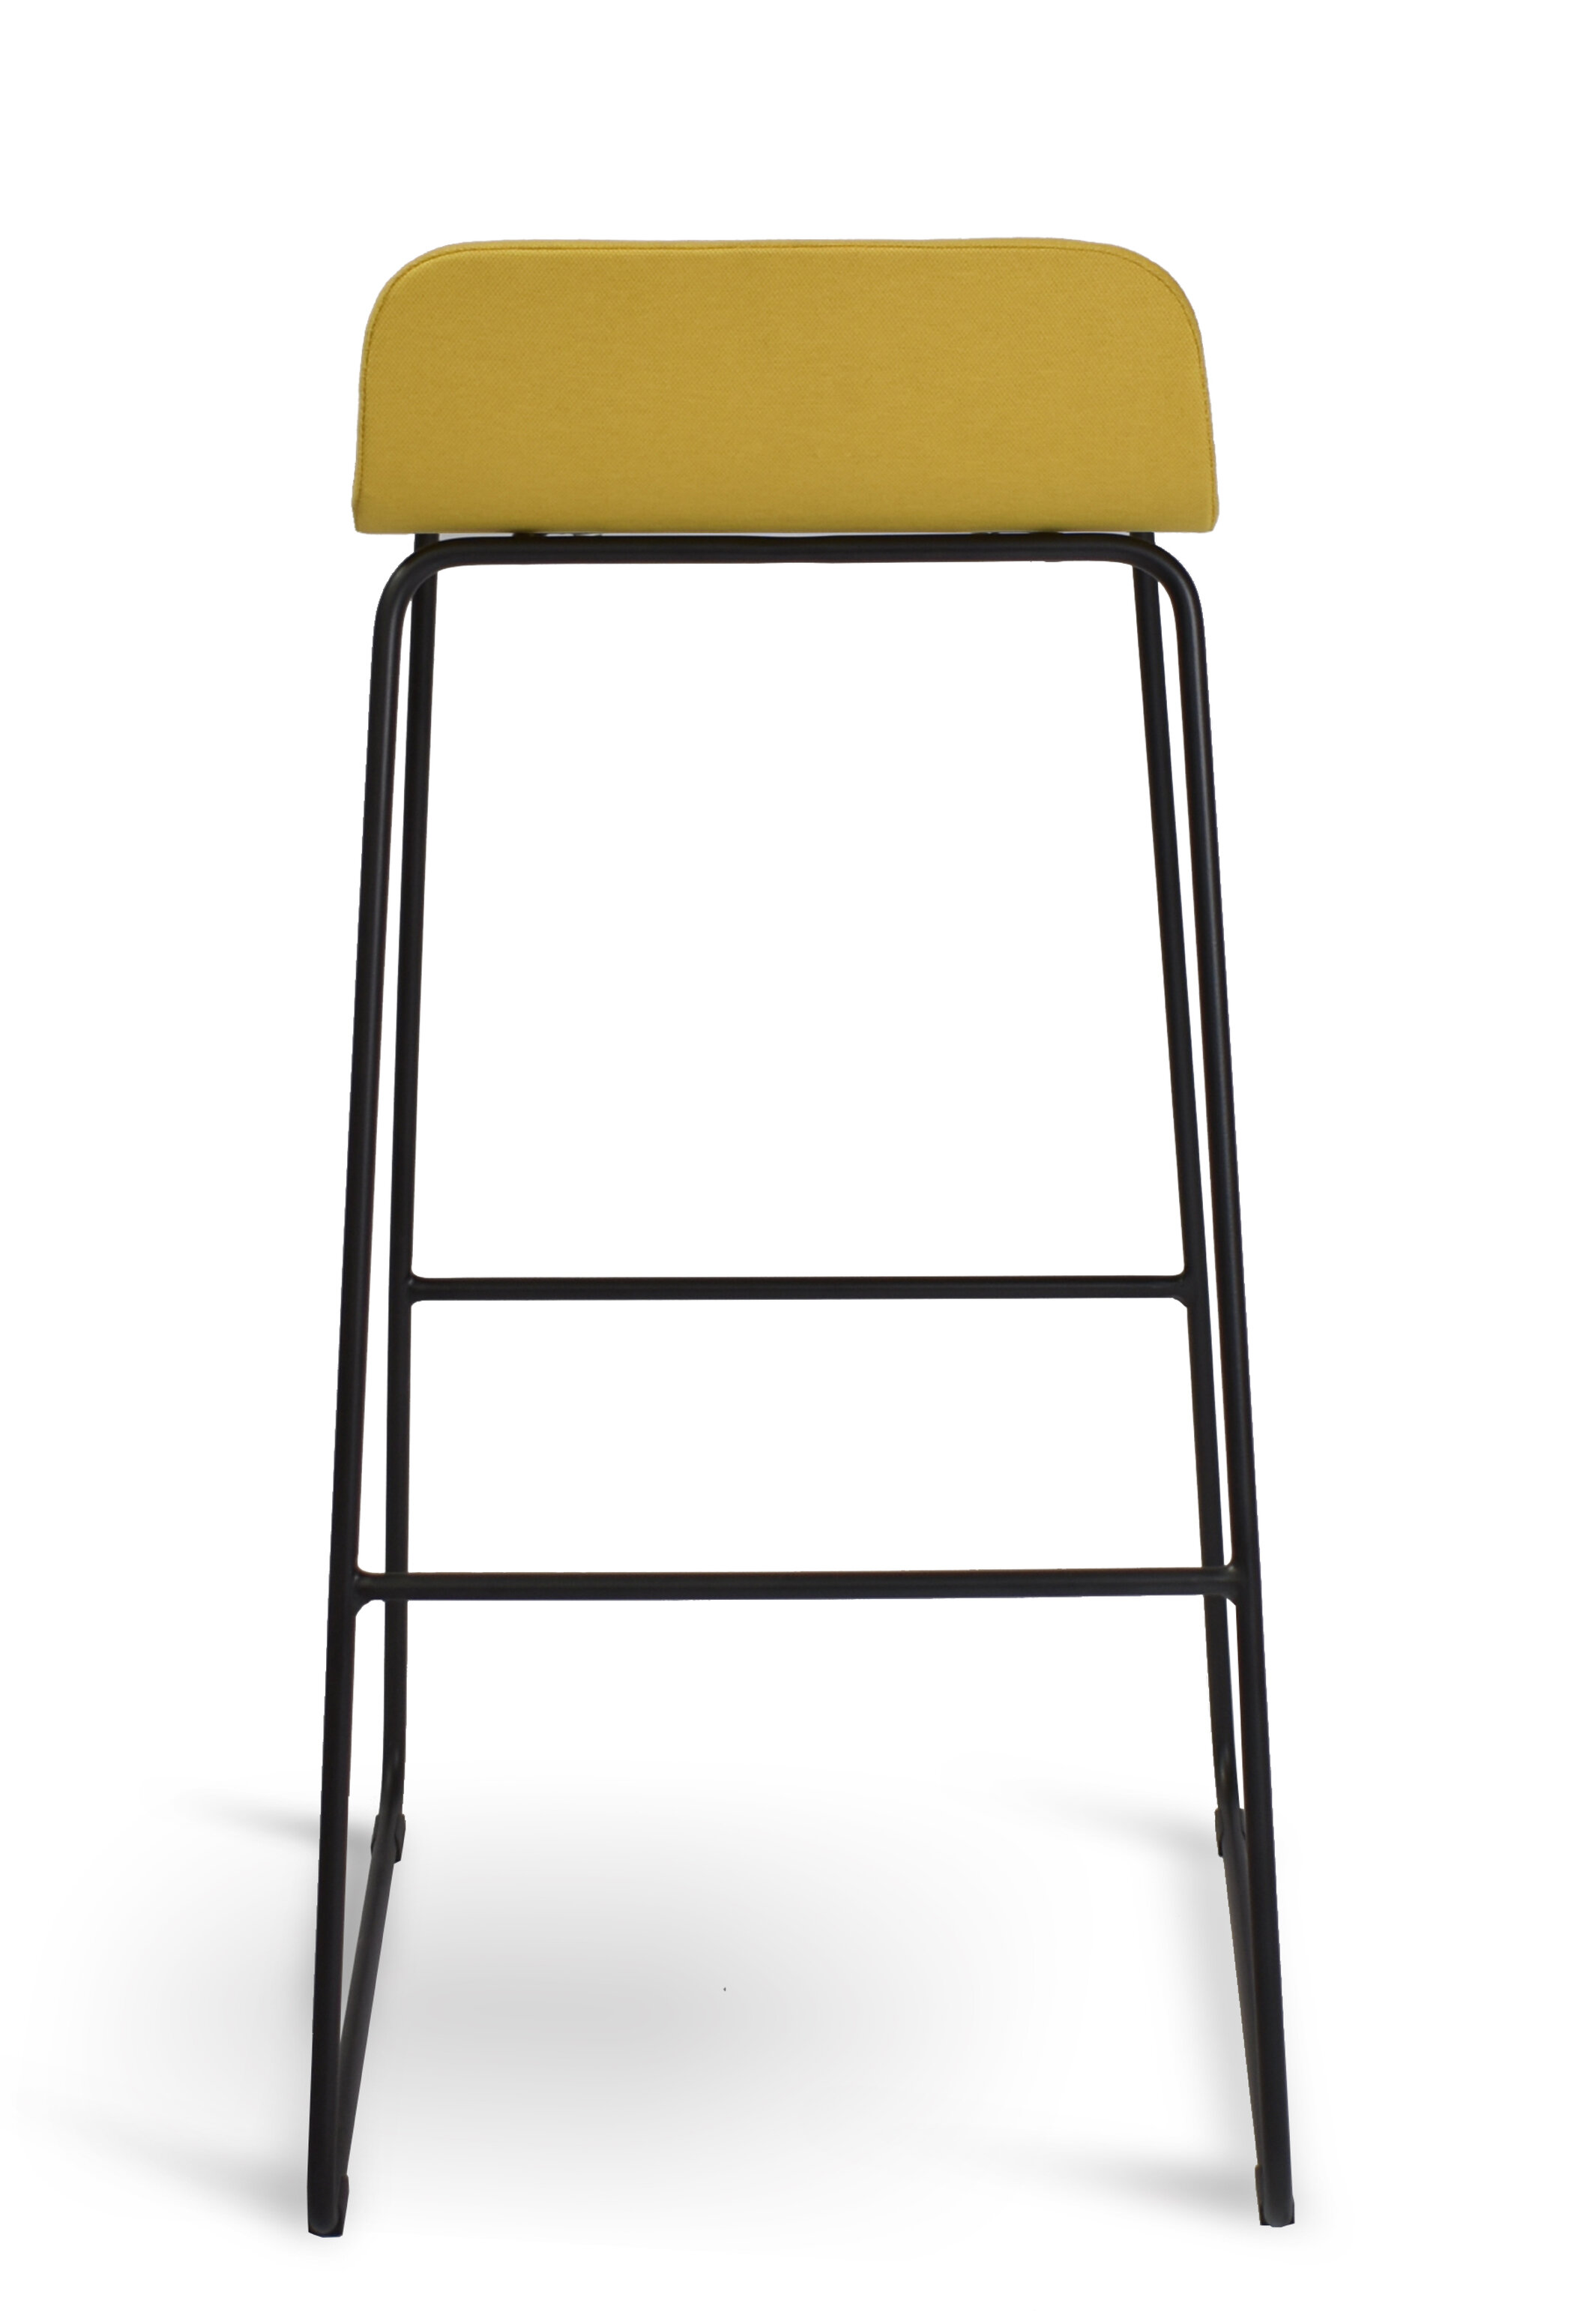 WS - Lolli High Stool - Yellow Upholstered (Back)